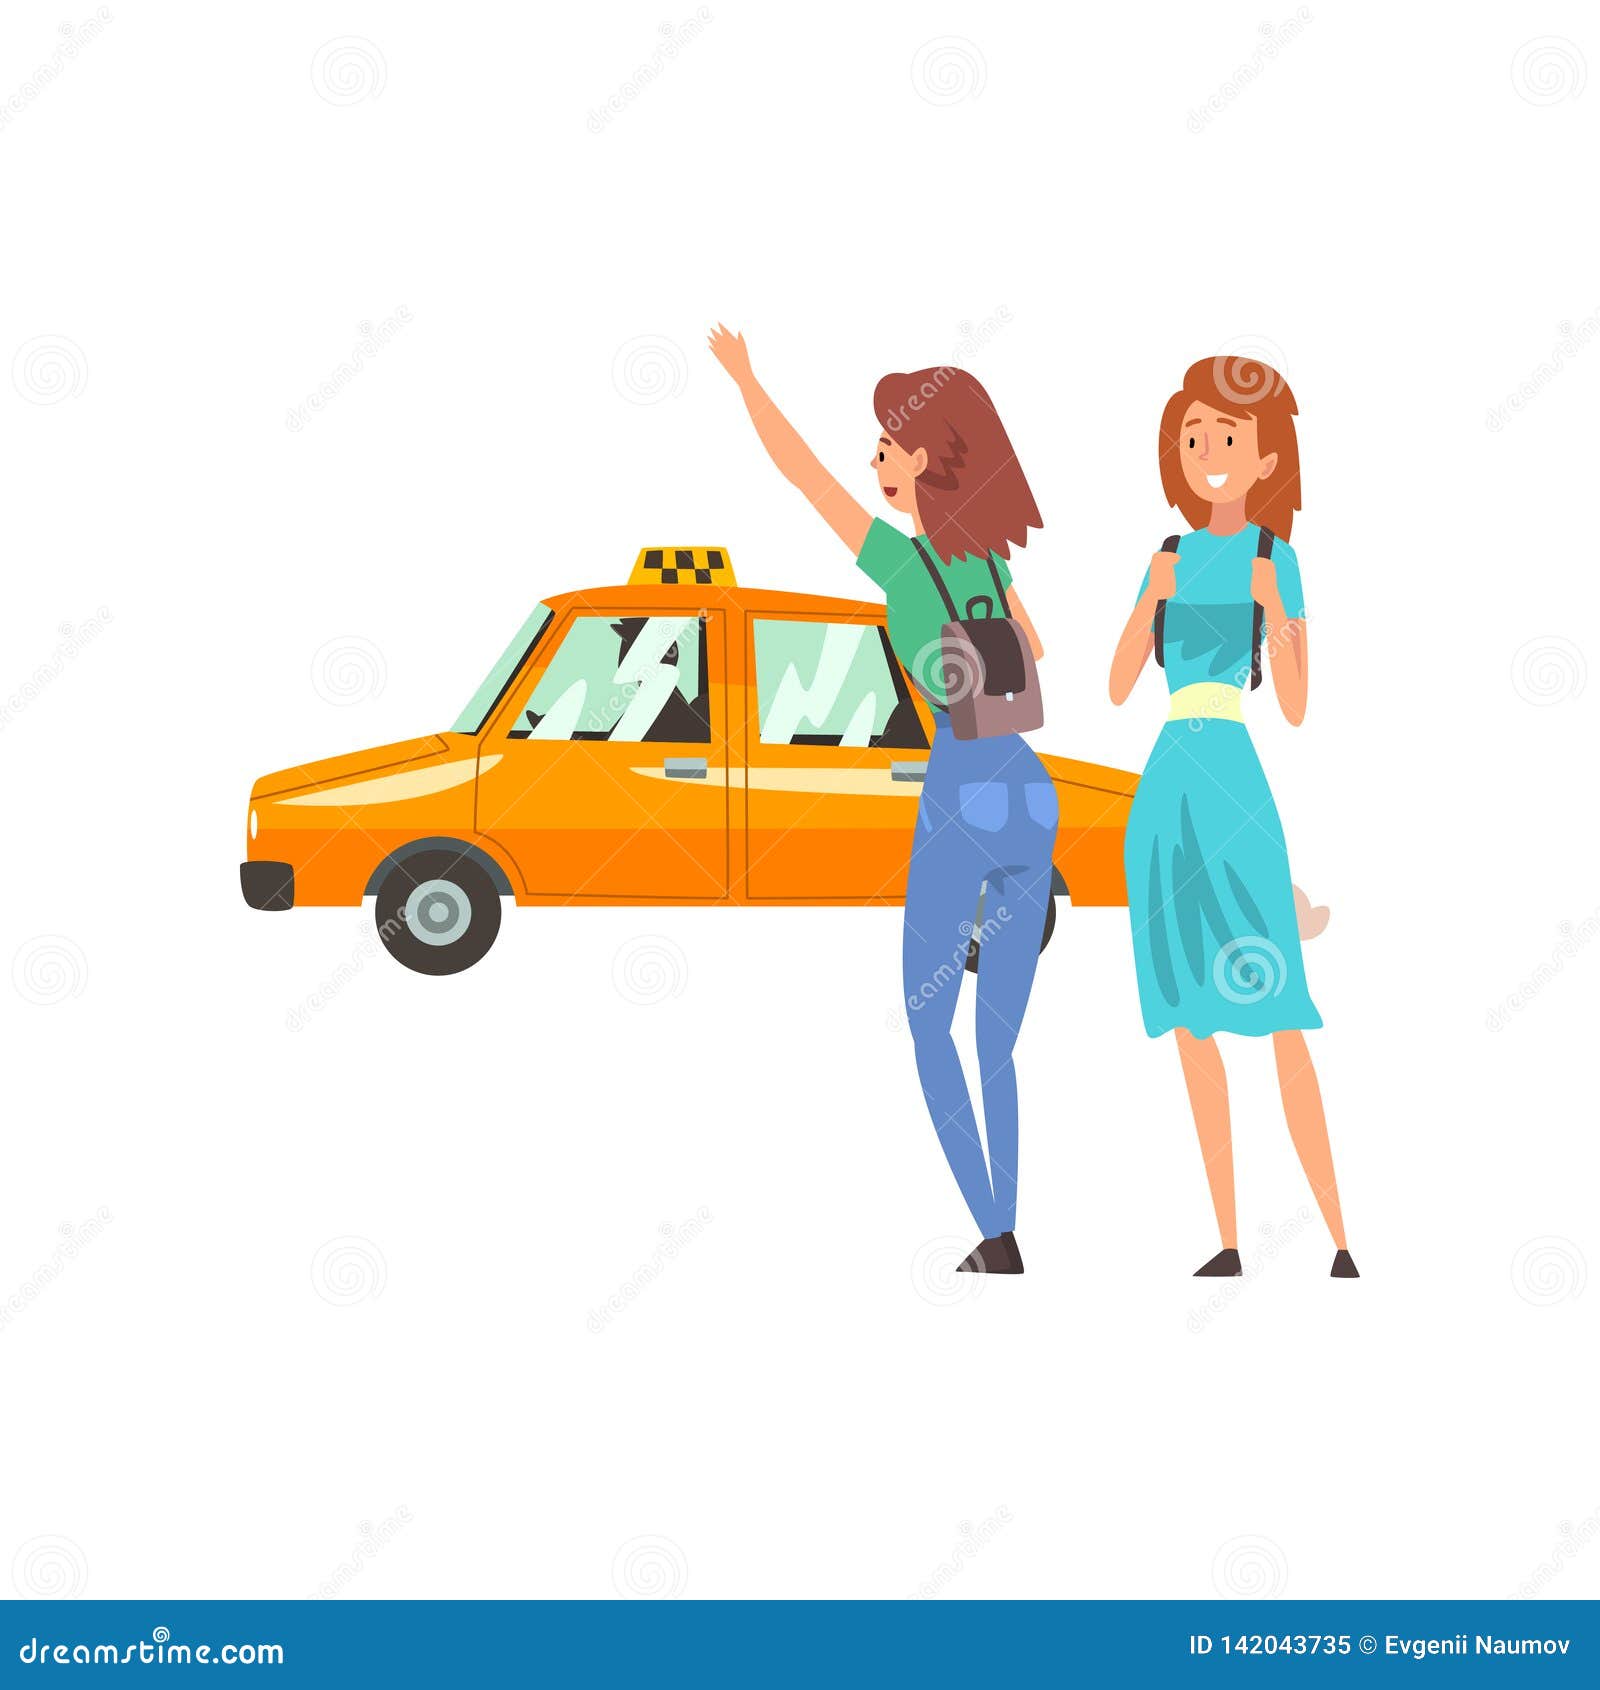 Taxi Service, Female Clients Hailing a Taxi Car Cartoon Vector Illustration  Stock Vector - Illustration of profession, road: 142043735